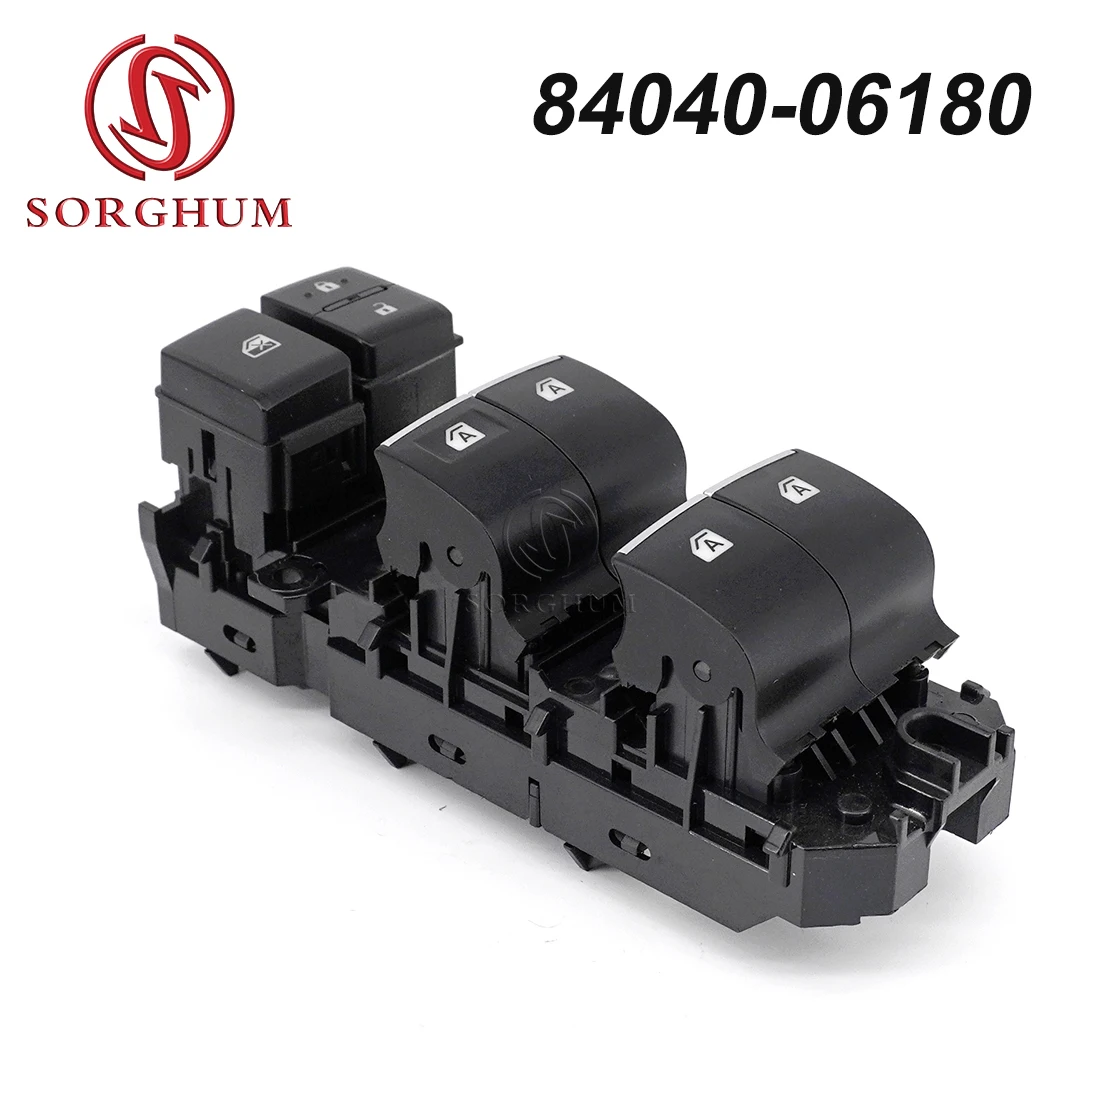 

SORGHUM LHD Electric Power Window Switch Master Console Button 84040-06180 Car Accessories For Toyota Camry C-HR 2018 2019 2020